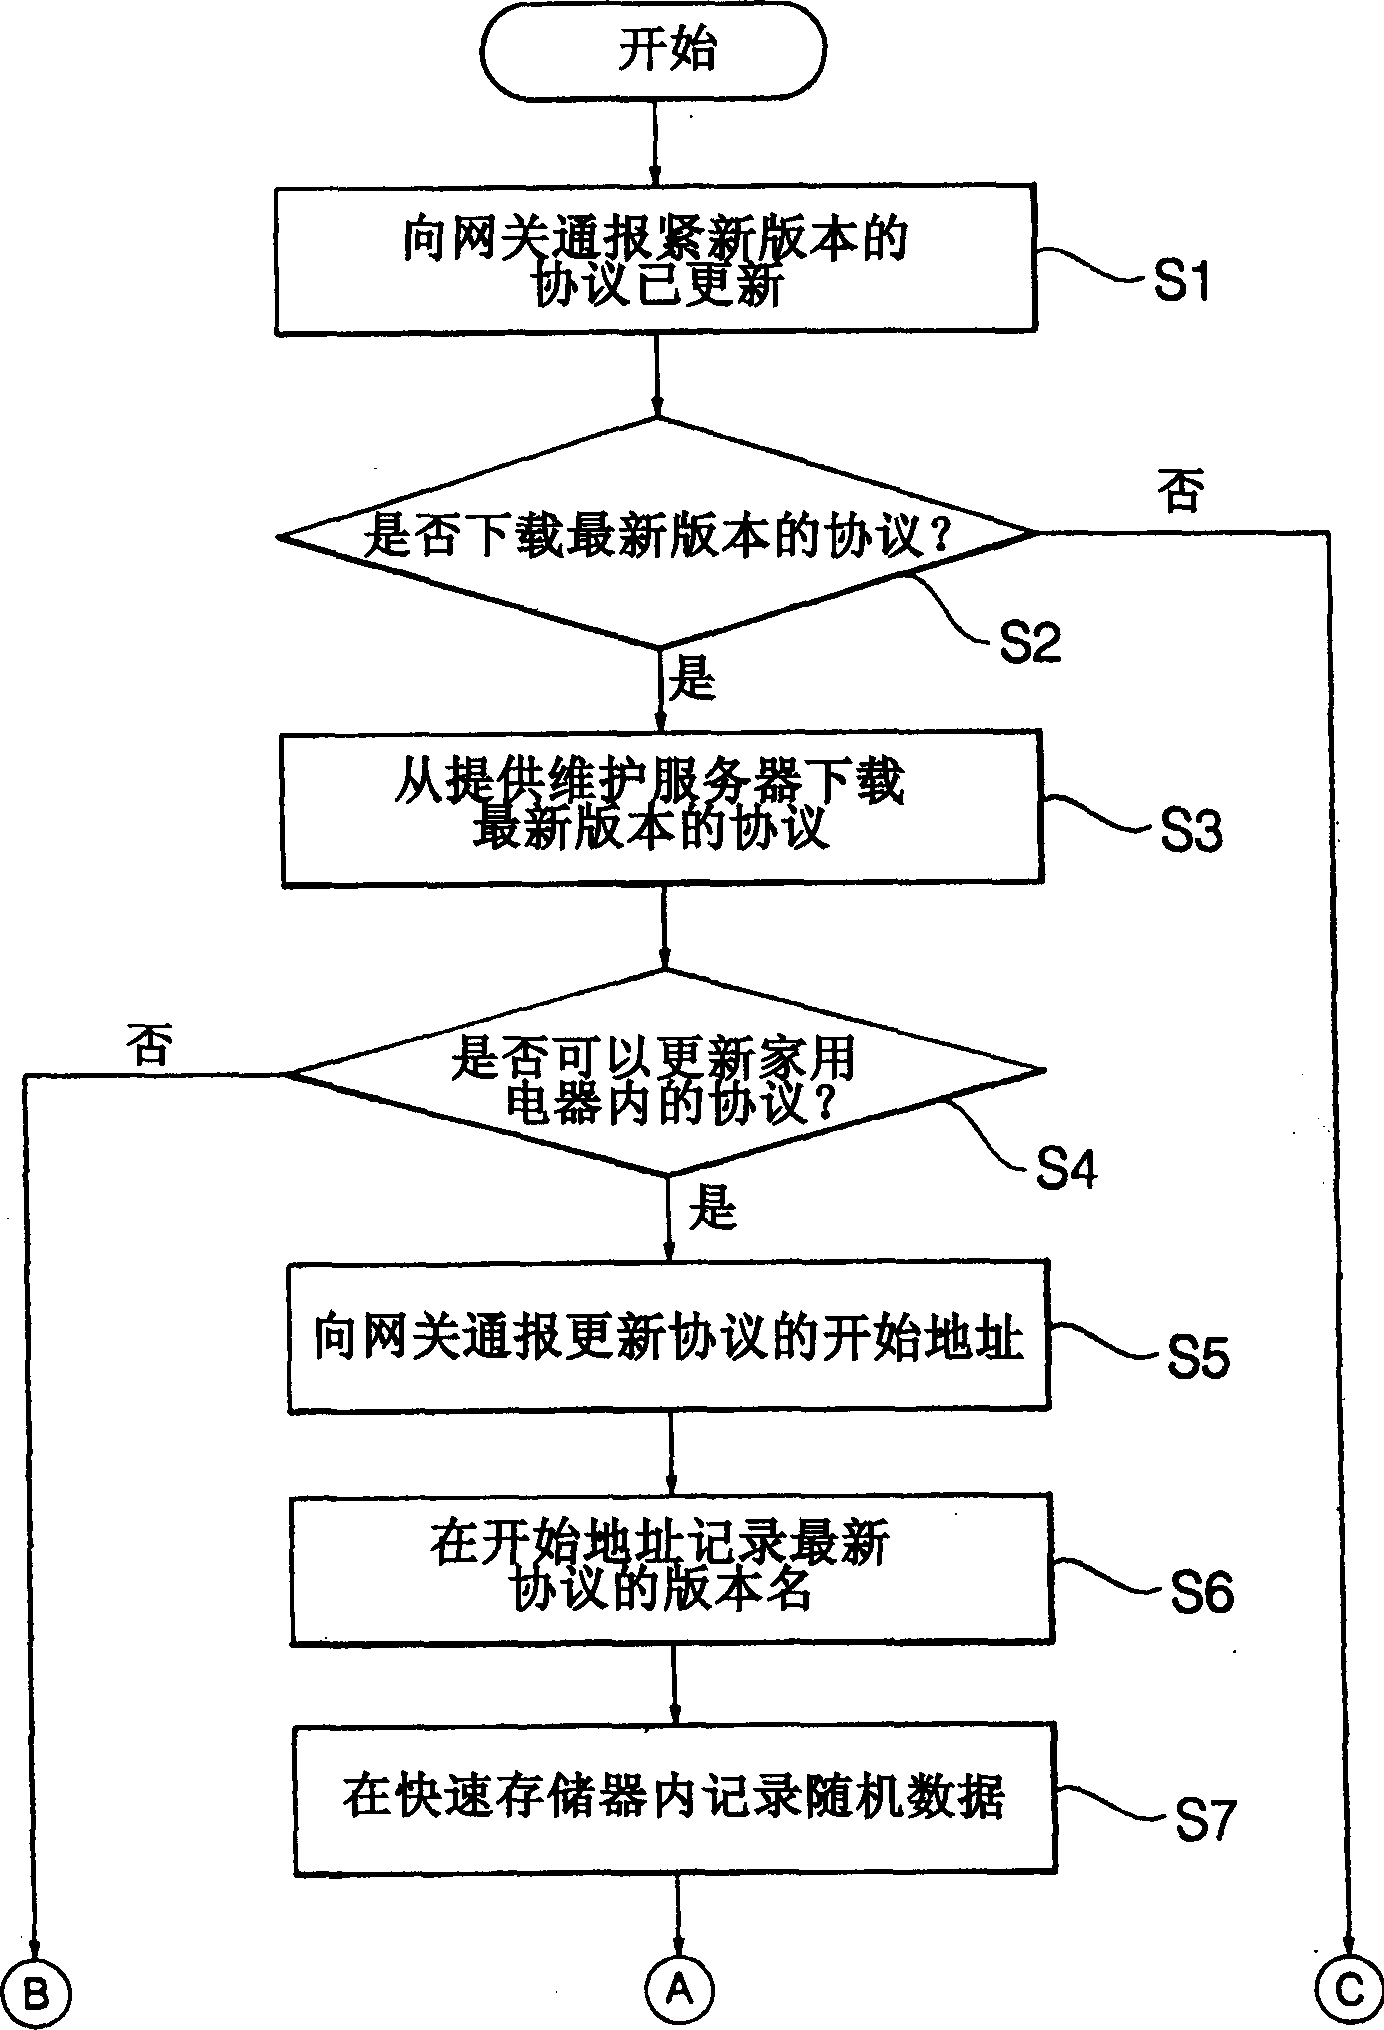 Method for updating protocol of domestic electric appliances